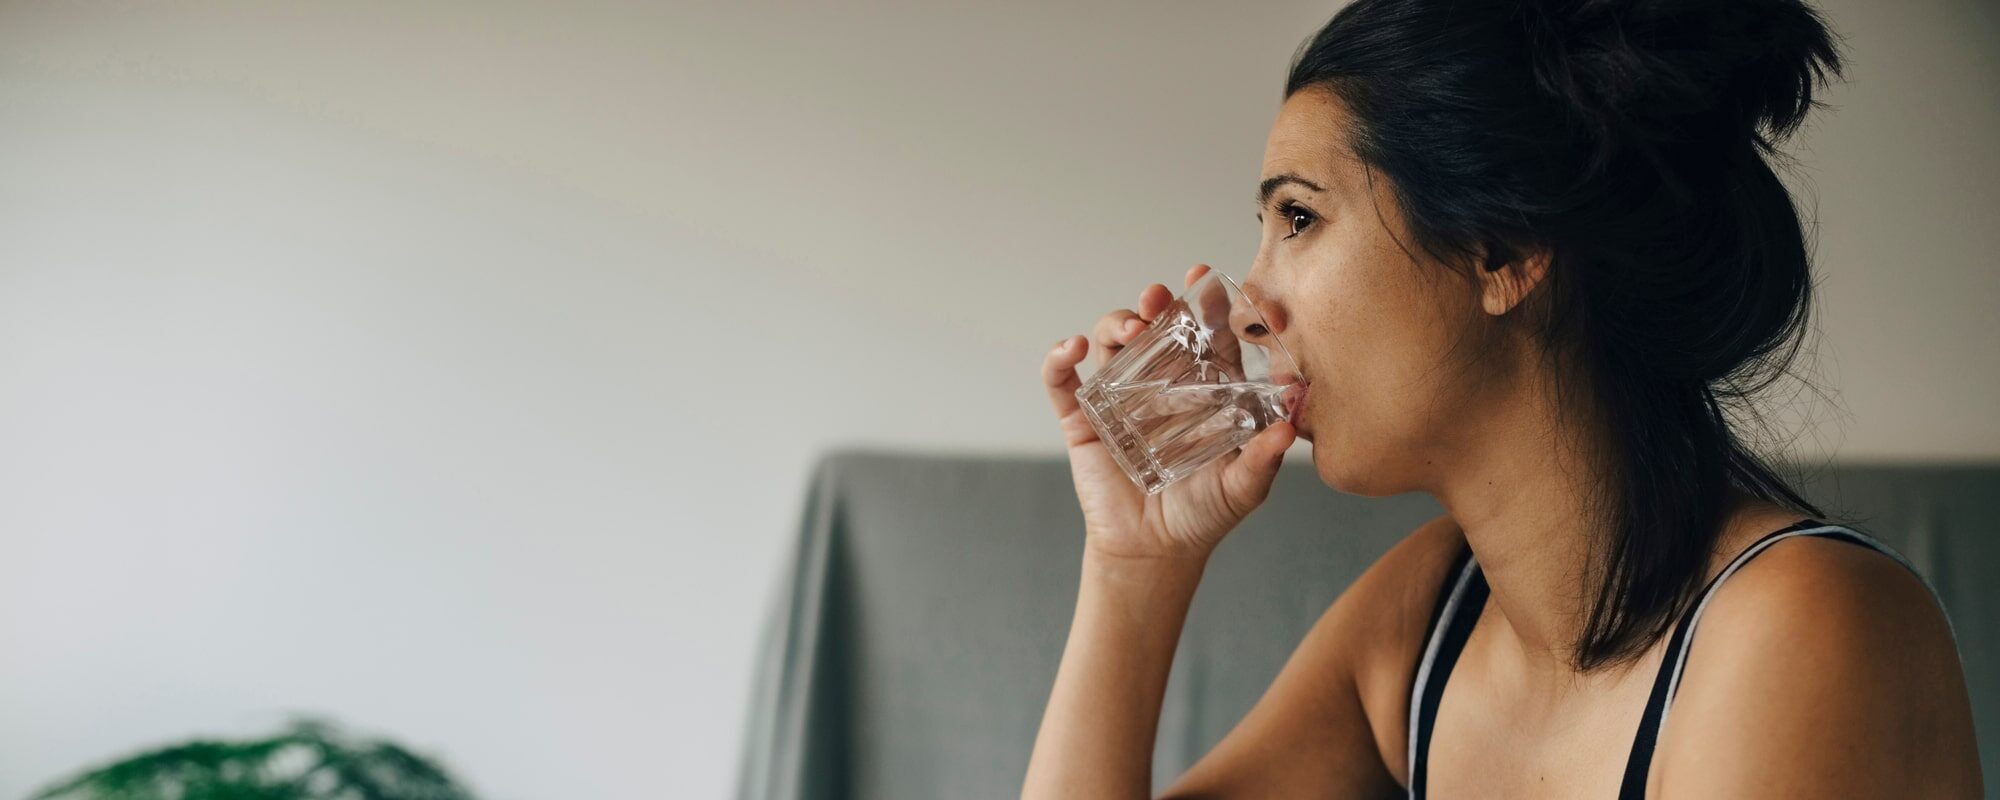 woman-drinking-water-from-a-glass-min